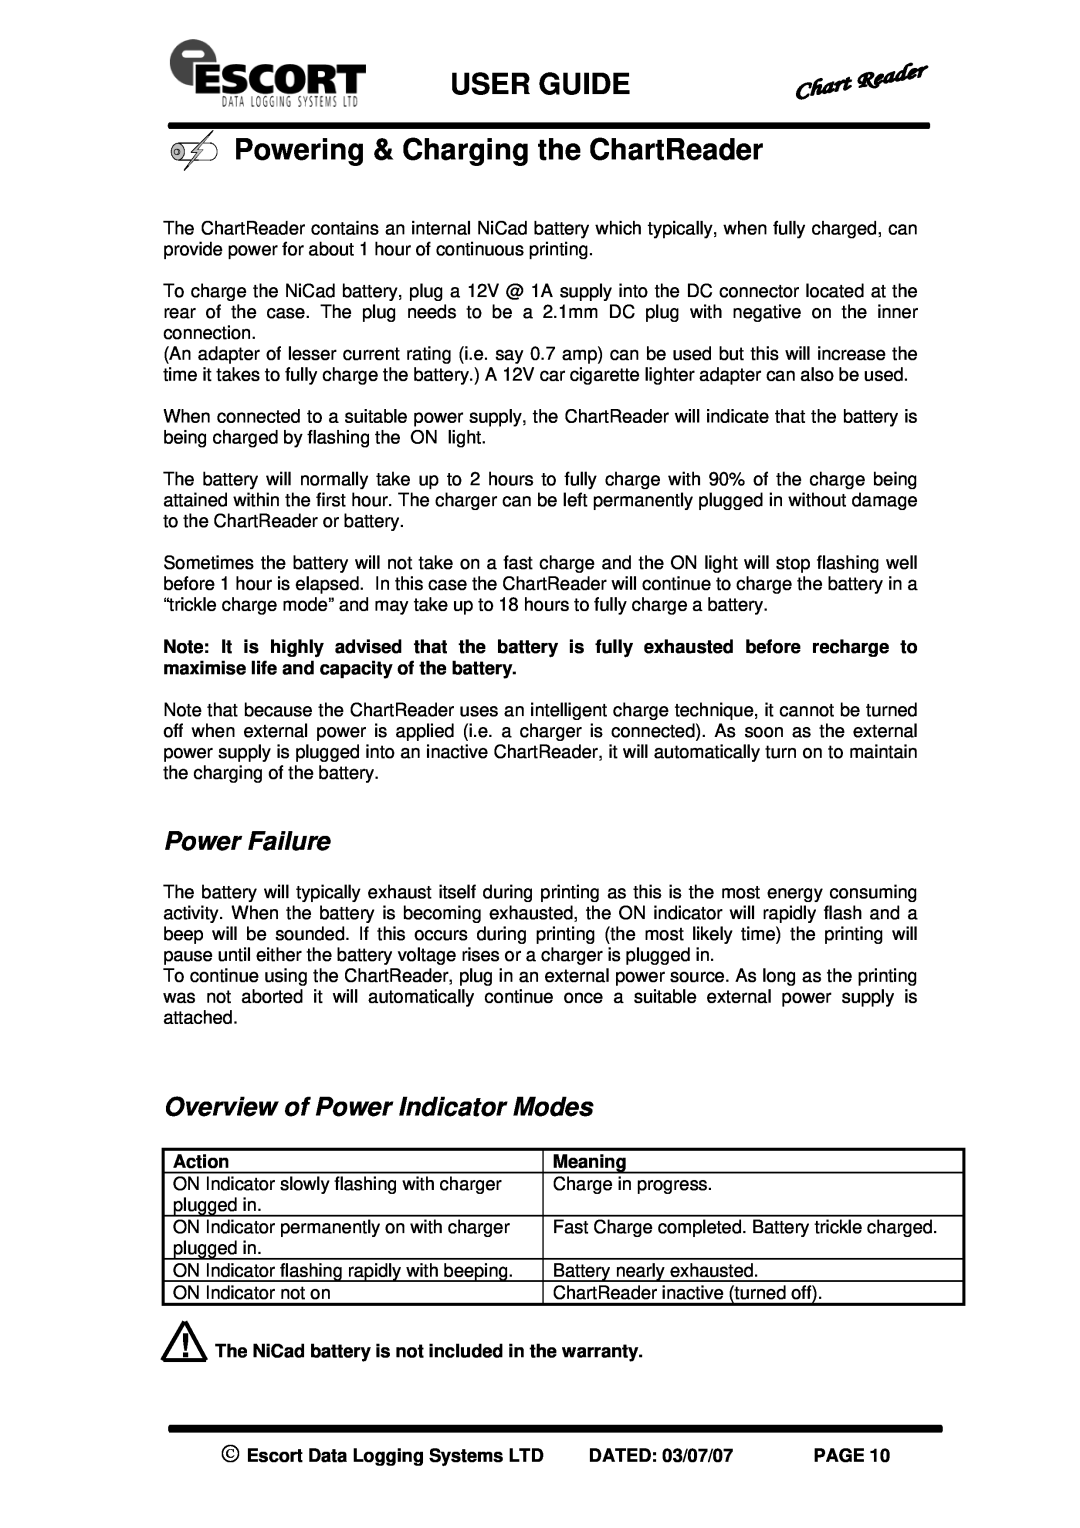 Escort EJ-CR-MEM USER GUIDE Powering & Charging the ChartReader, Power Failure, Overview of Power Indicator Modes, Meaning 